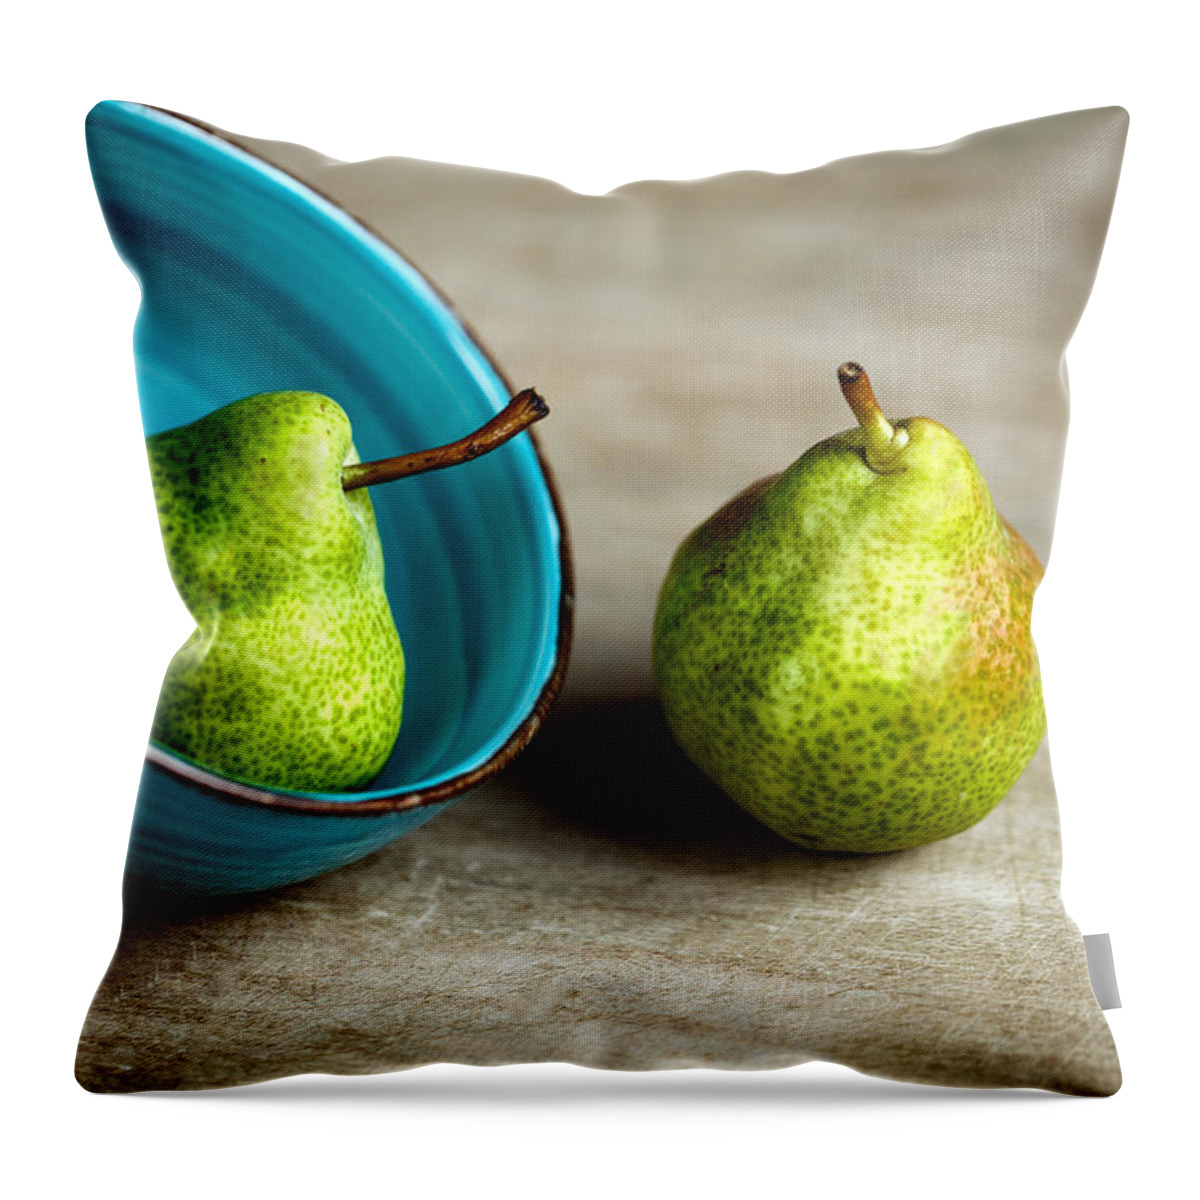 Pear Throw Pillow featuring the photograph Pears #4 by Nailia Schwarz